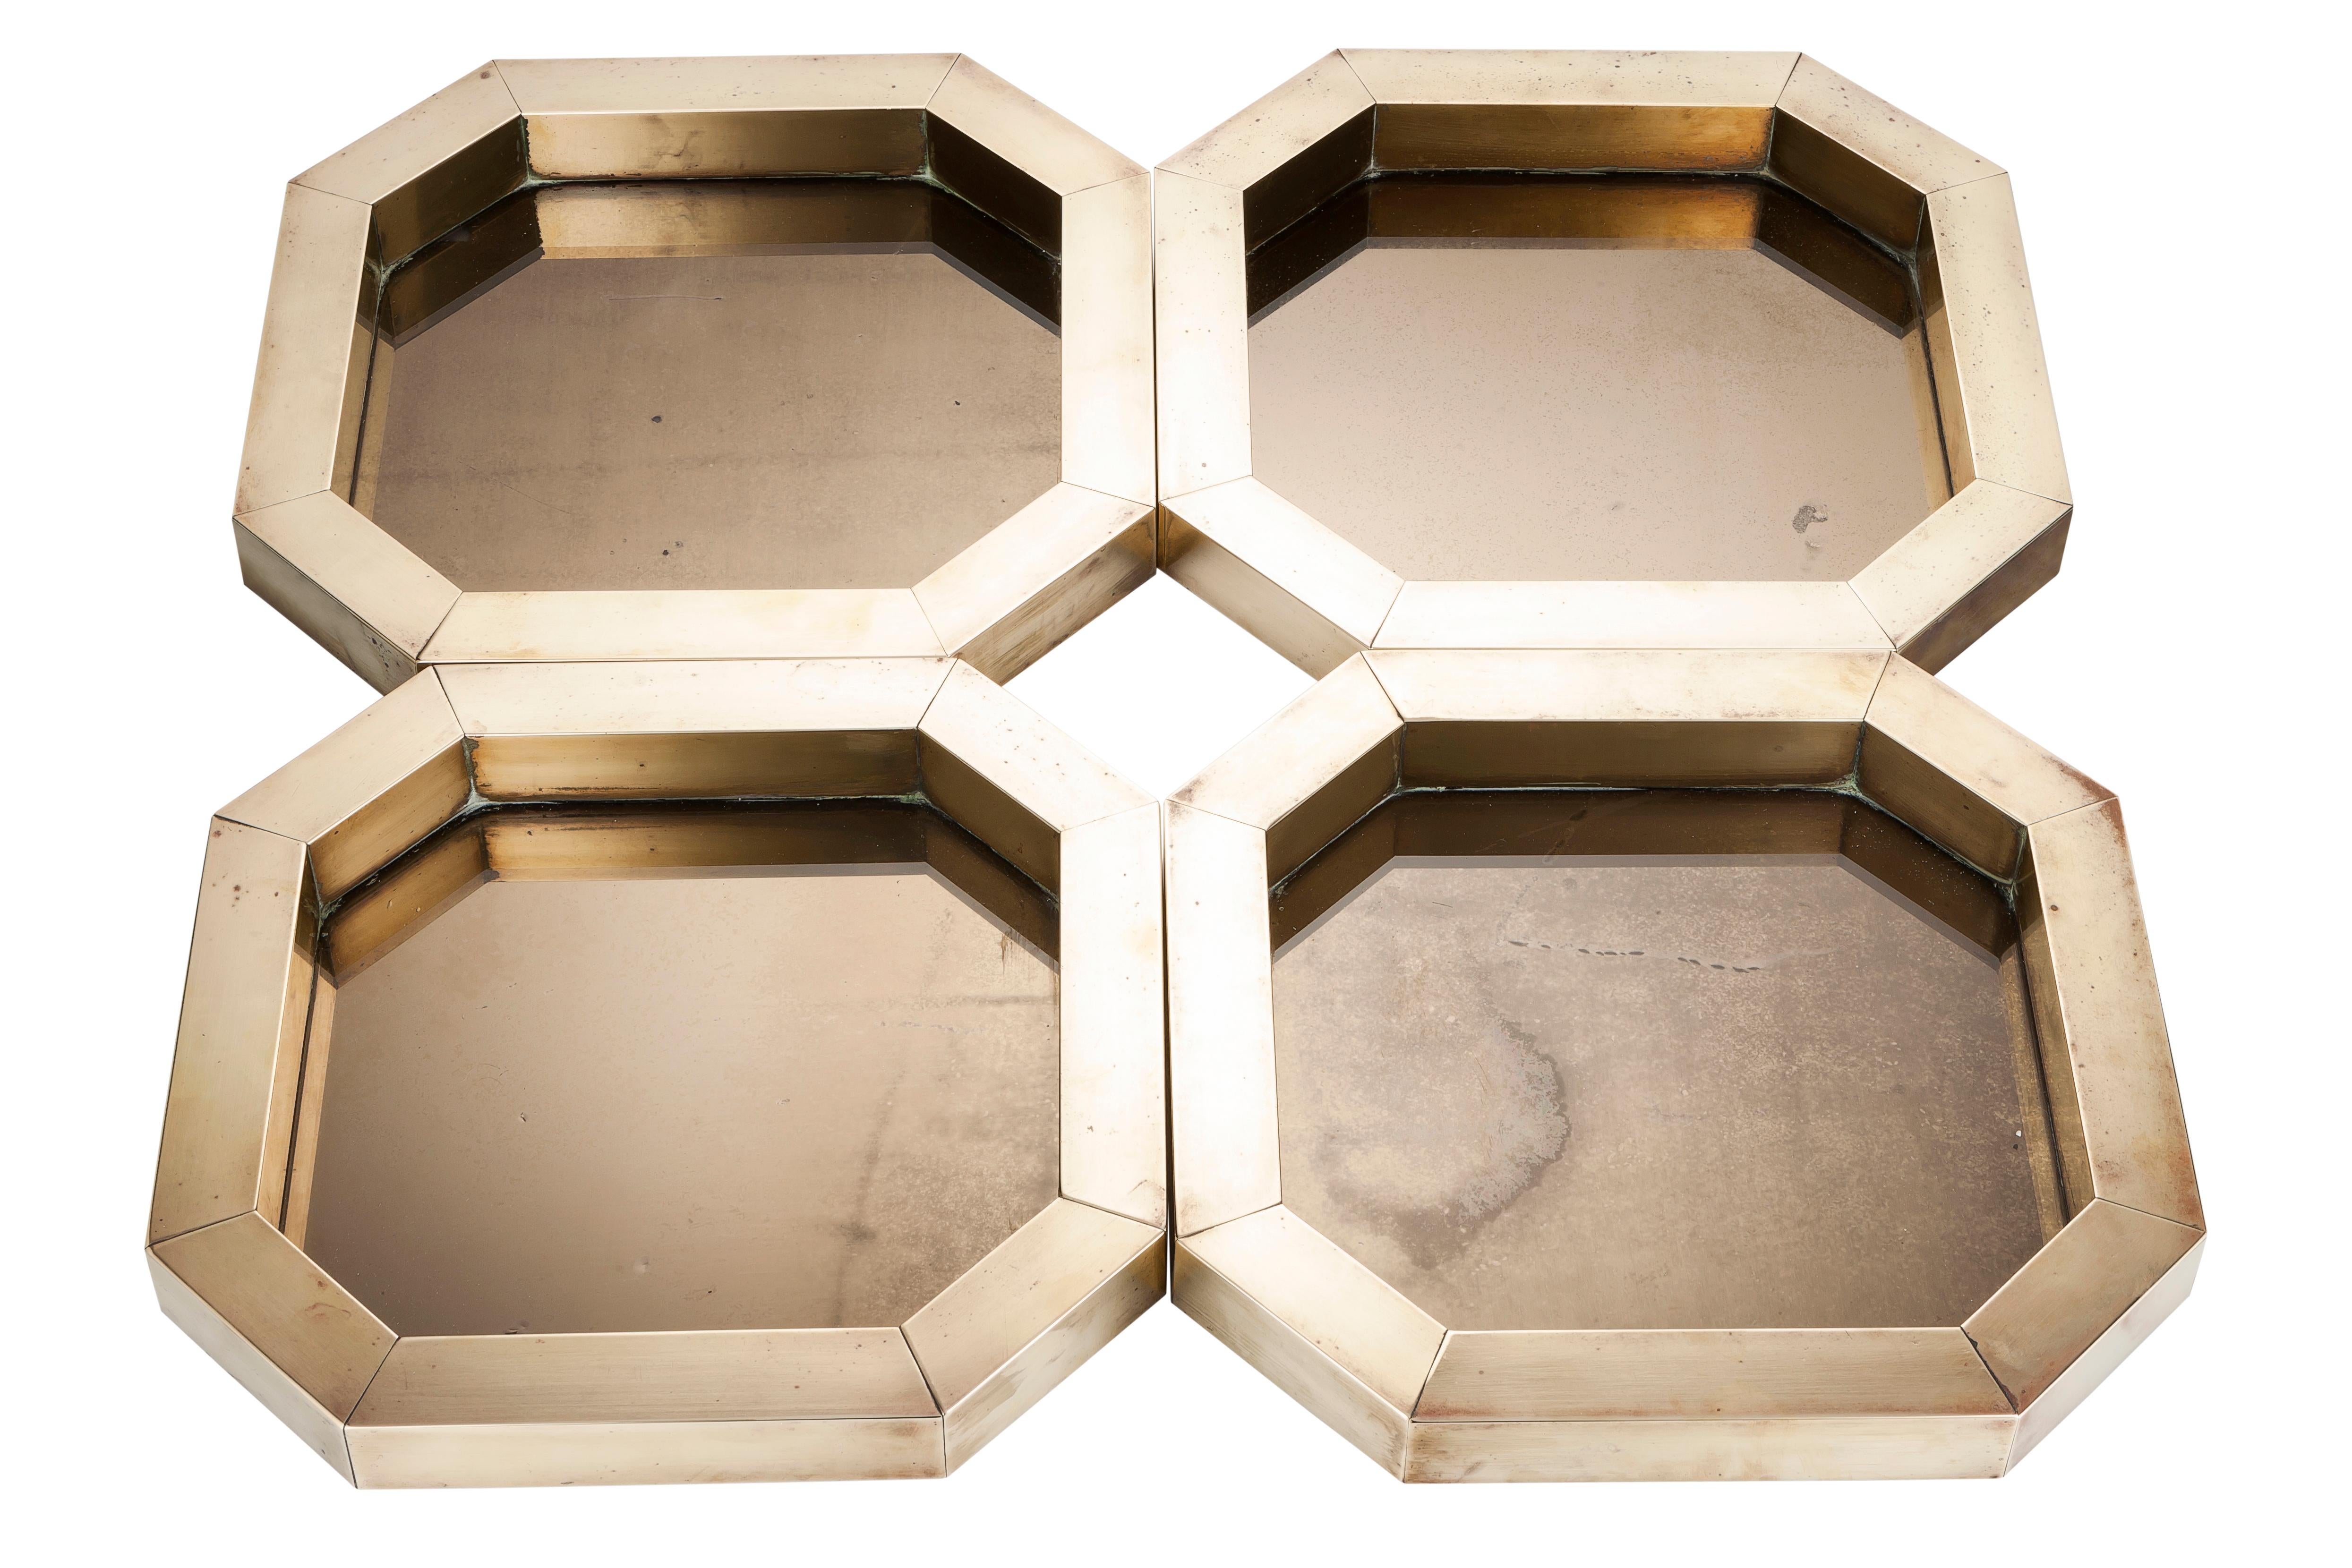 Hexagonal trinket trays, with brass frames and copper mirrored surface areas, designed by Hartwig Bullerdieck for hotel magnate Sol Kerzner for his Sun City project in 1979. Manufactured by Design Benedict.